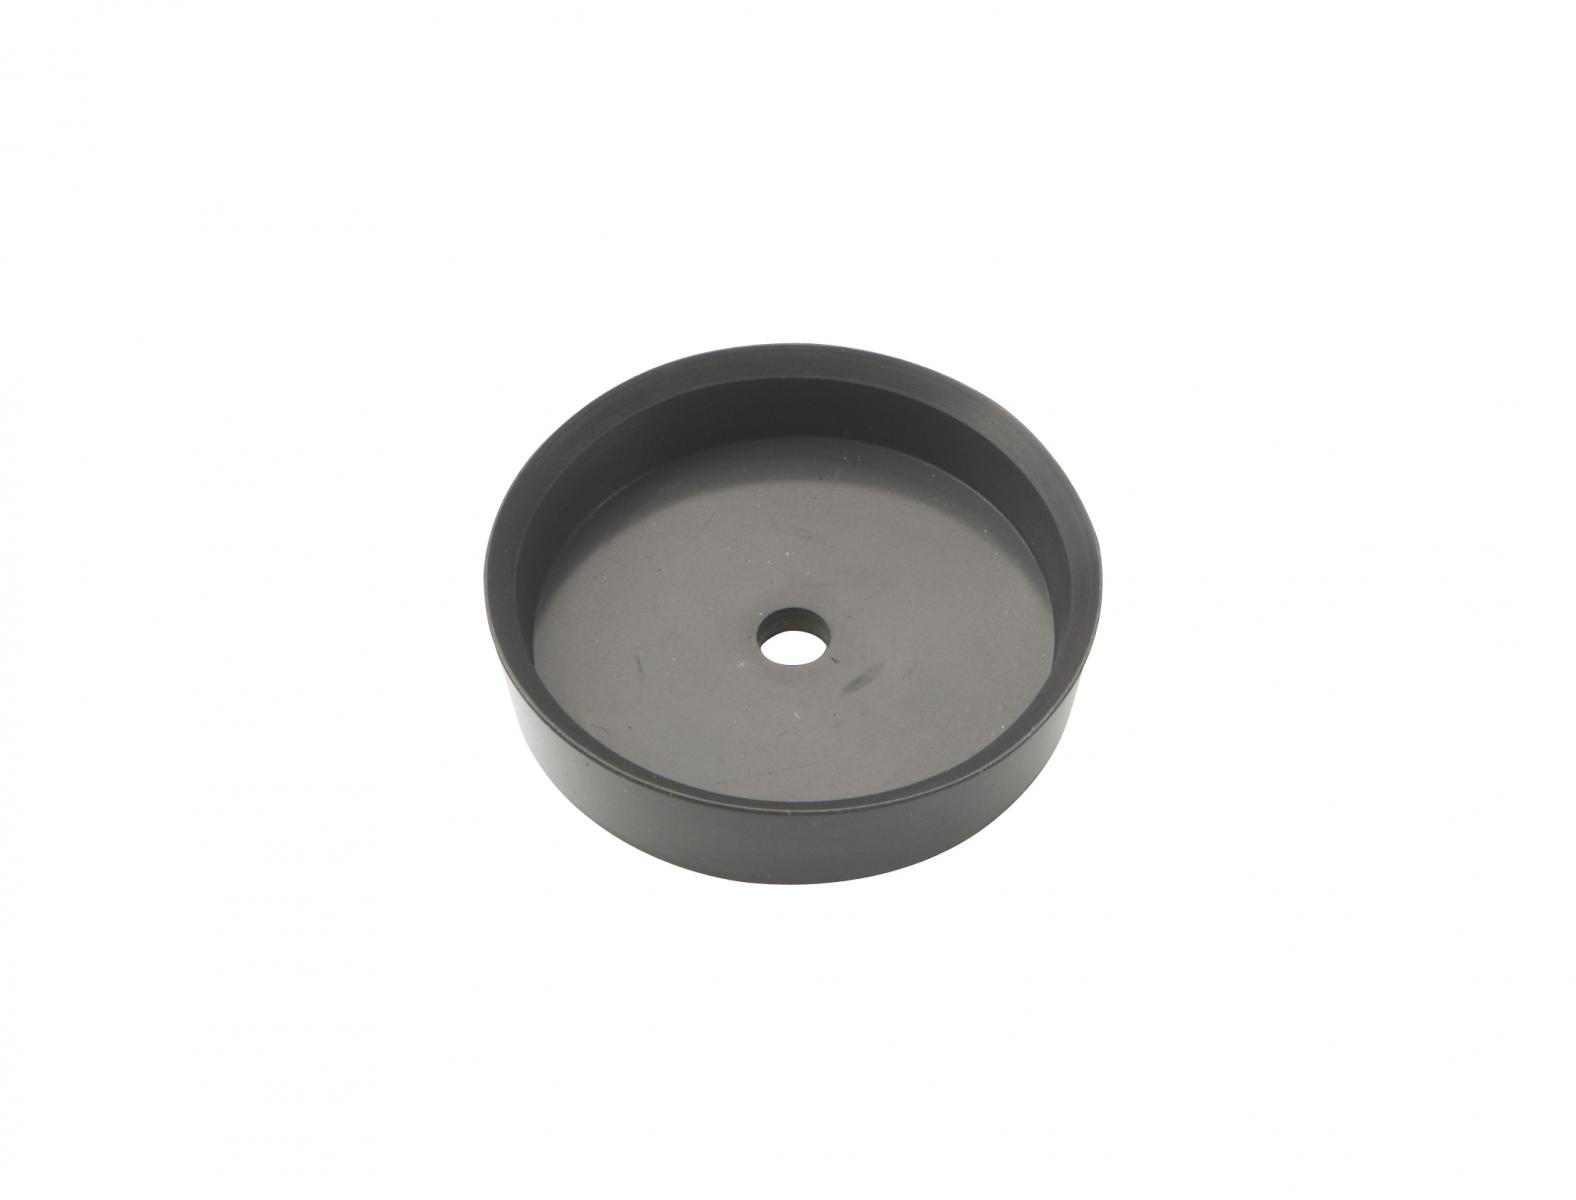 TapeTech® Plunger Cup. Part number 050203